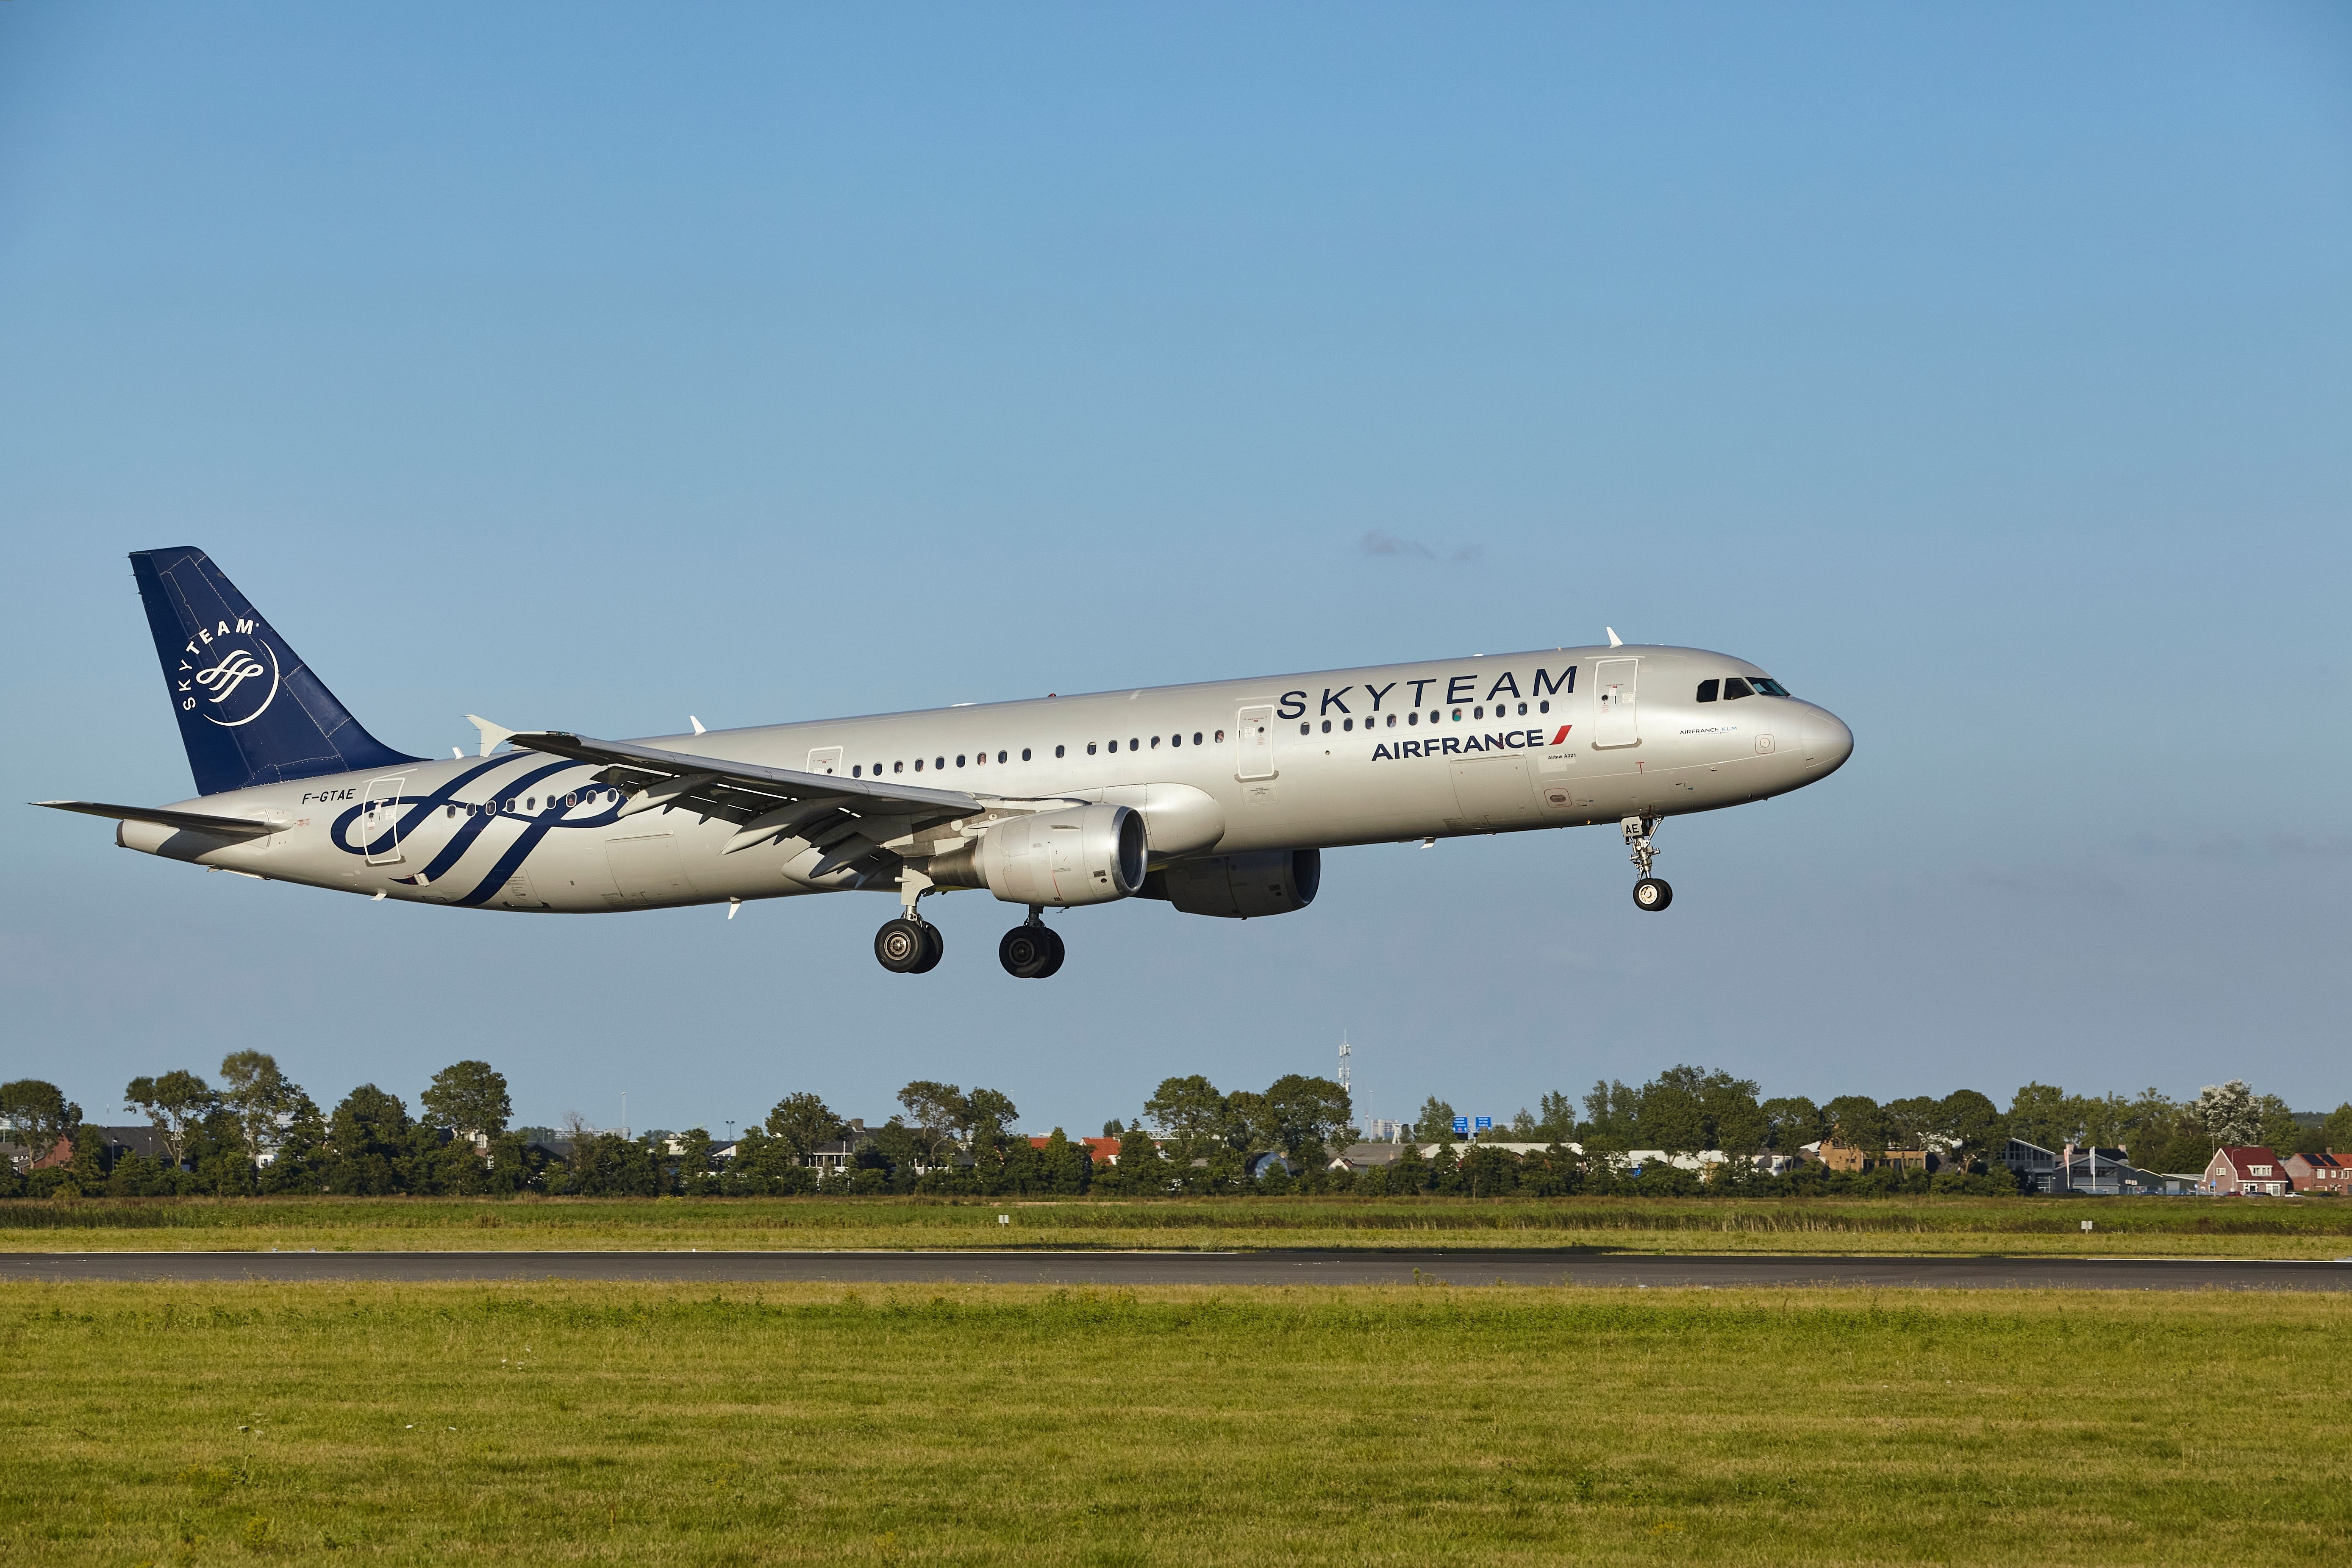 Airbus A321-212 of Air France (SkyTeam livery) with the identification F-GTAE lands at Amsterdam Airport Schiphol 